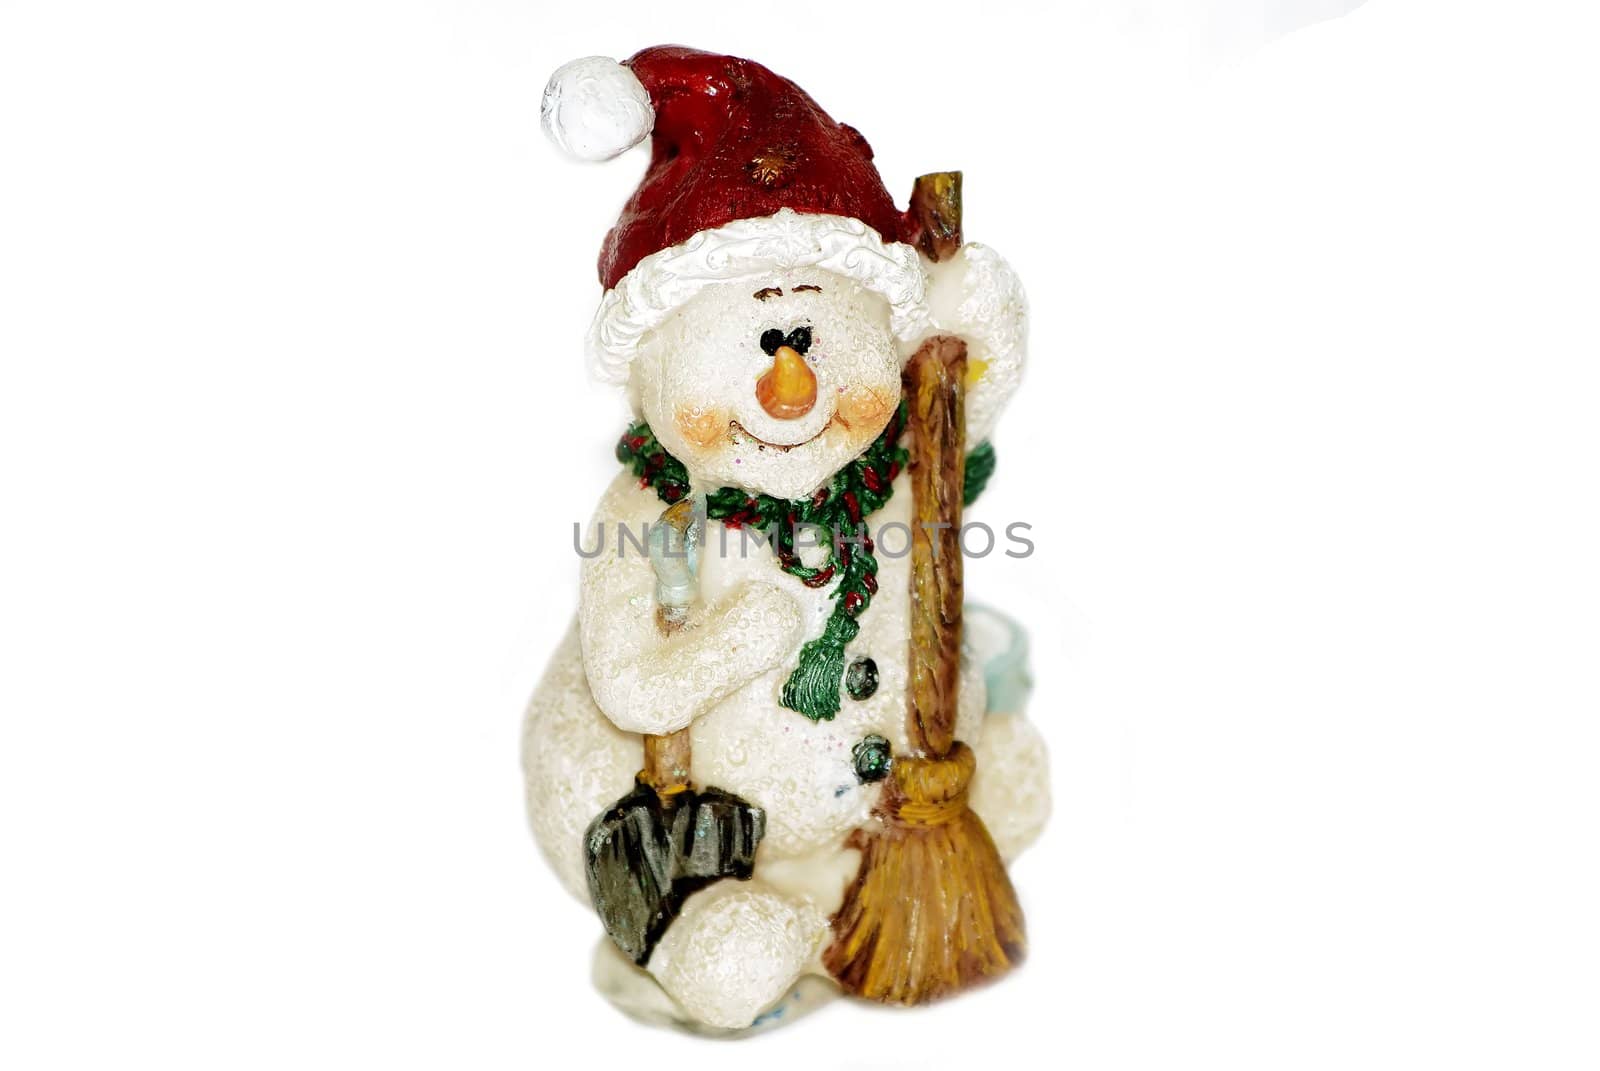 Statuette of snowmen with broom